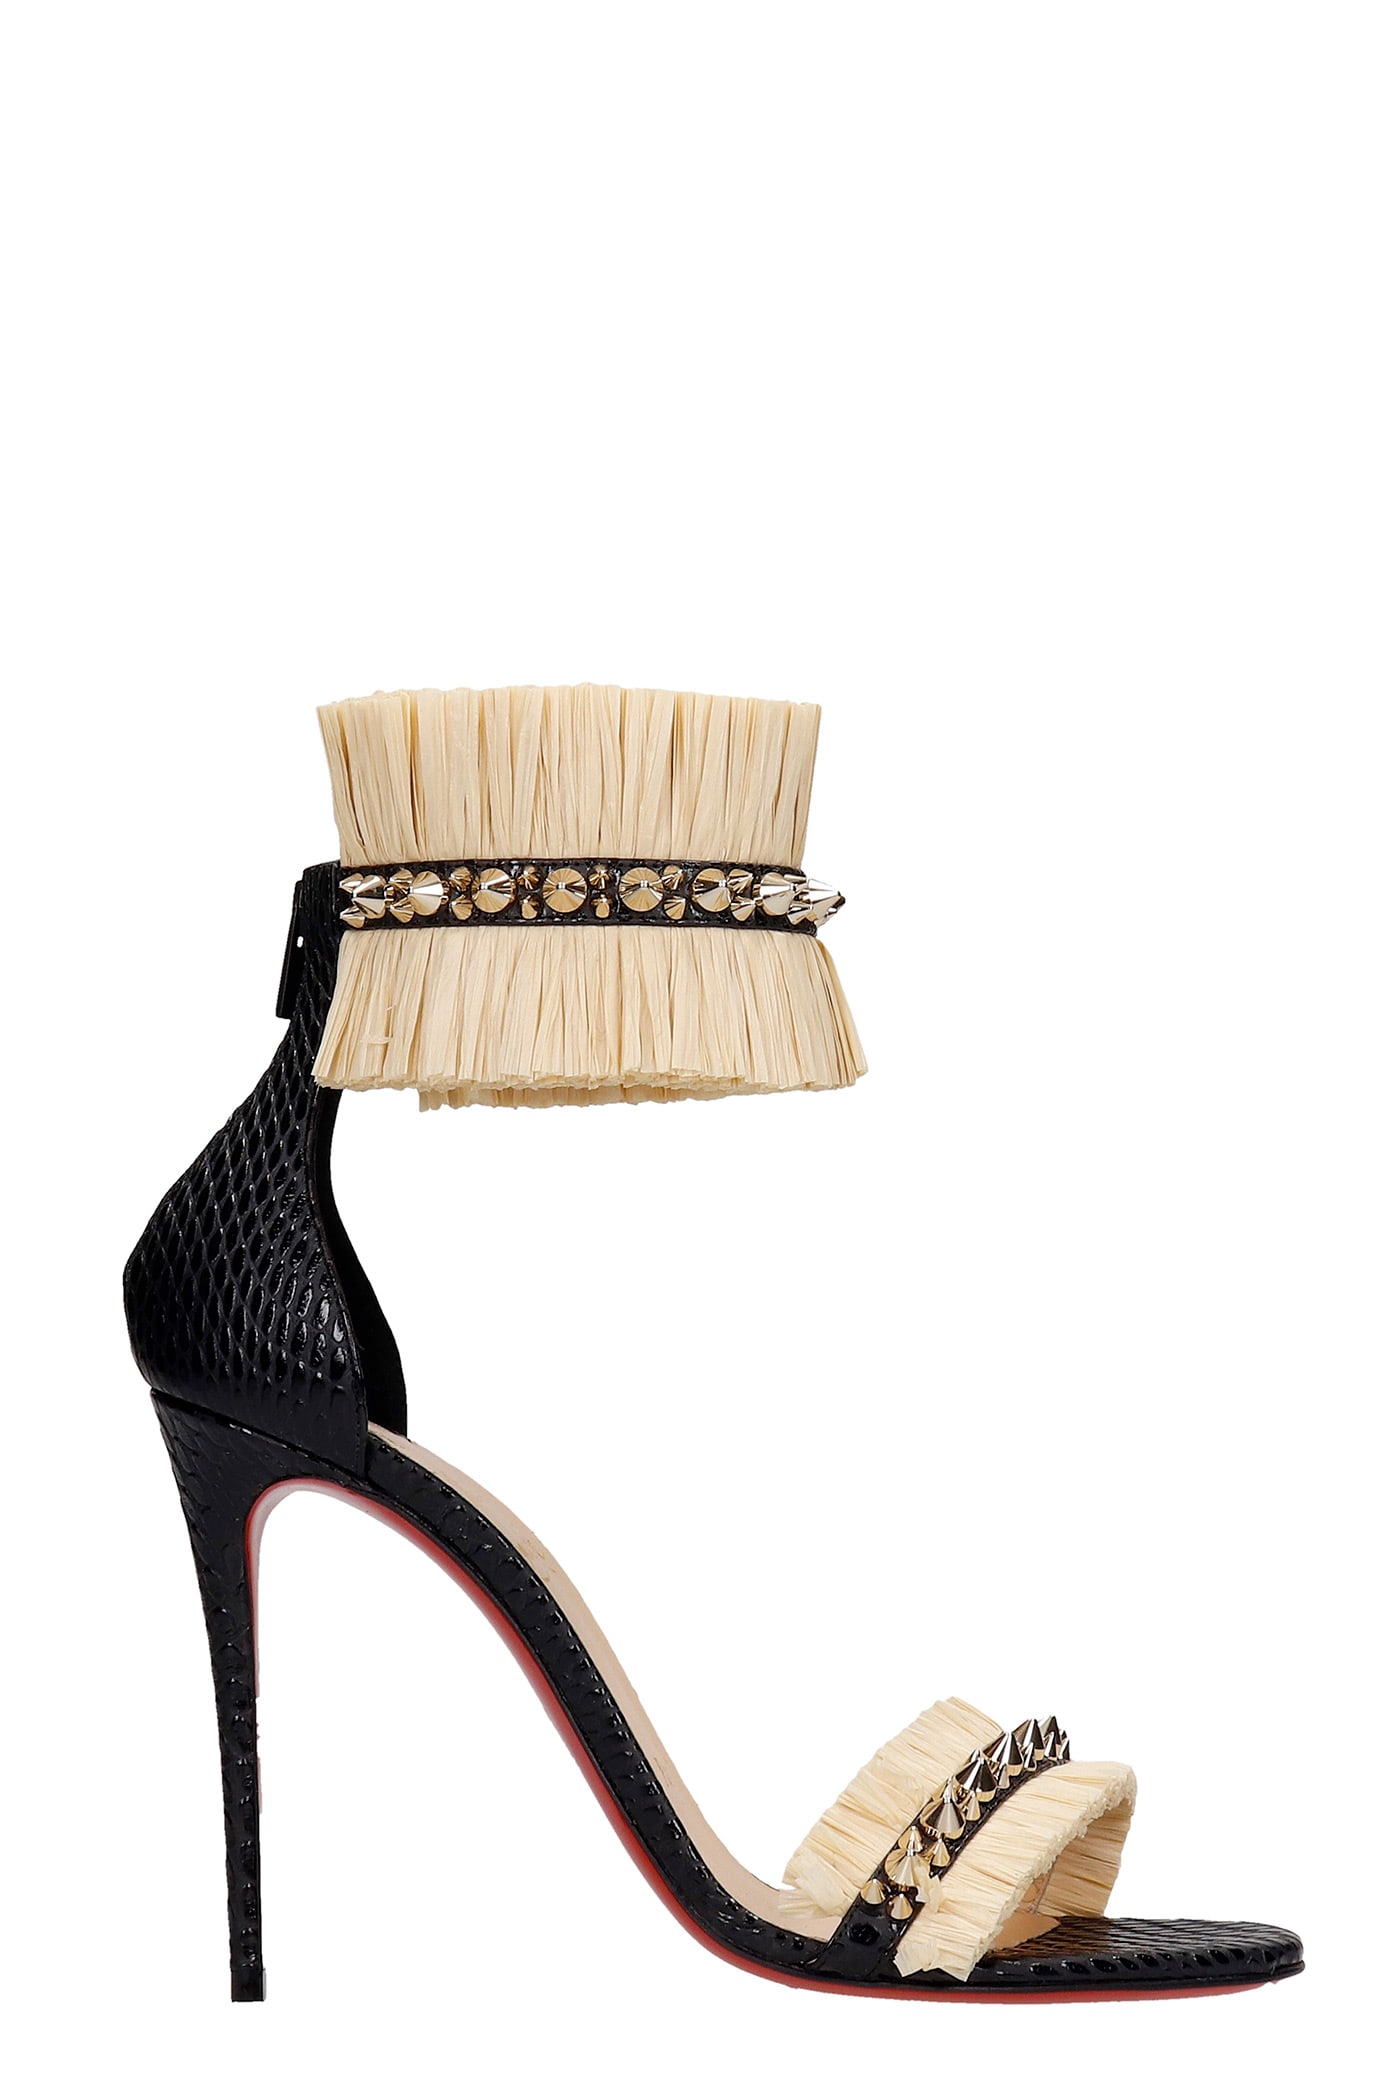 Christian Louboutin Poupedou 100 Sandals In Black Leather